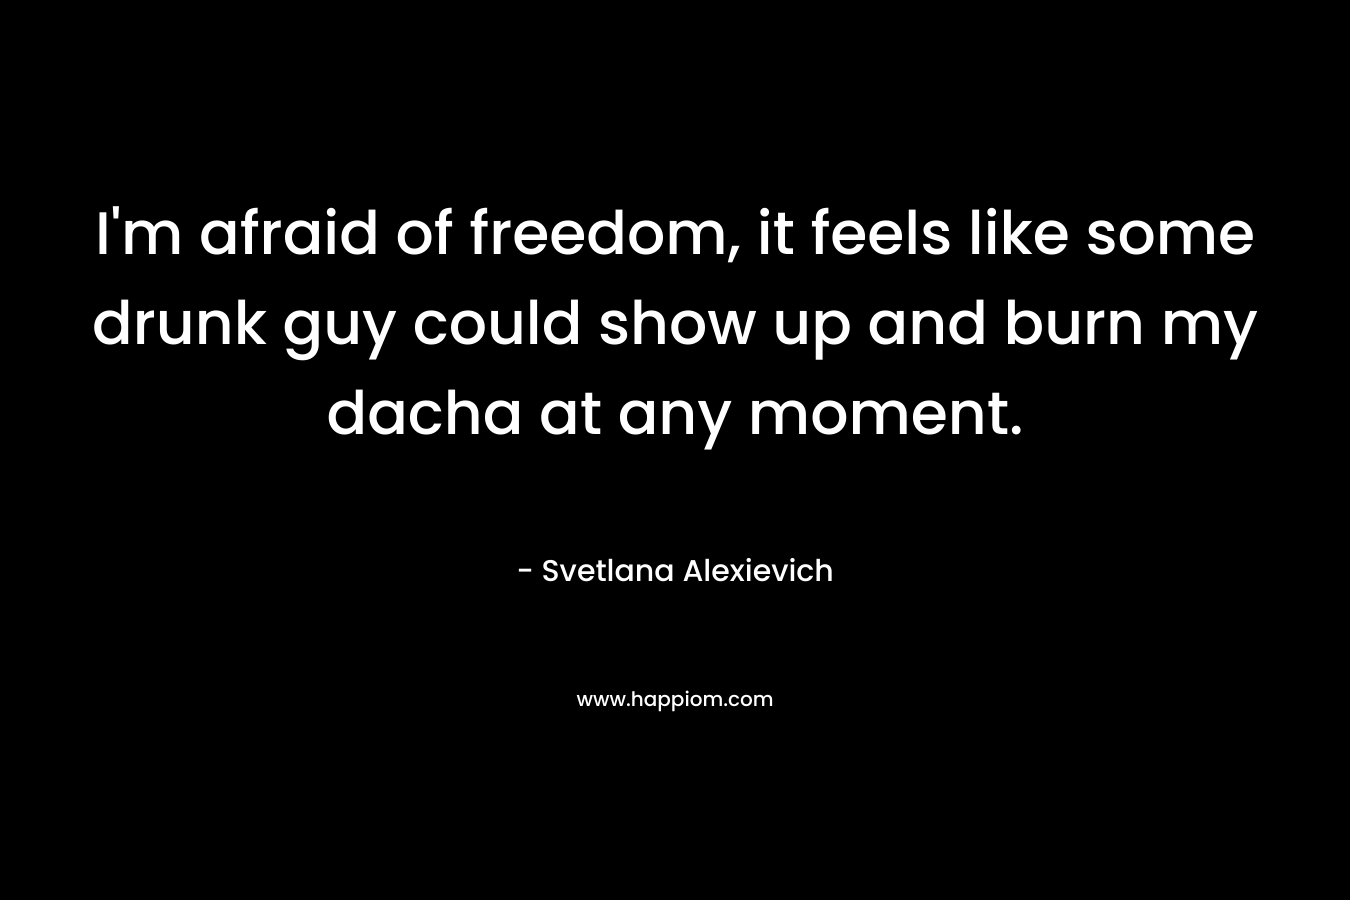 I’m afraid of freedom, it feels like some drunk guy could show up and burn my dacha at any moment. – Svetlana Alexievich